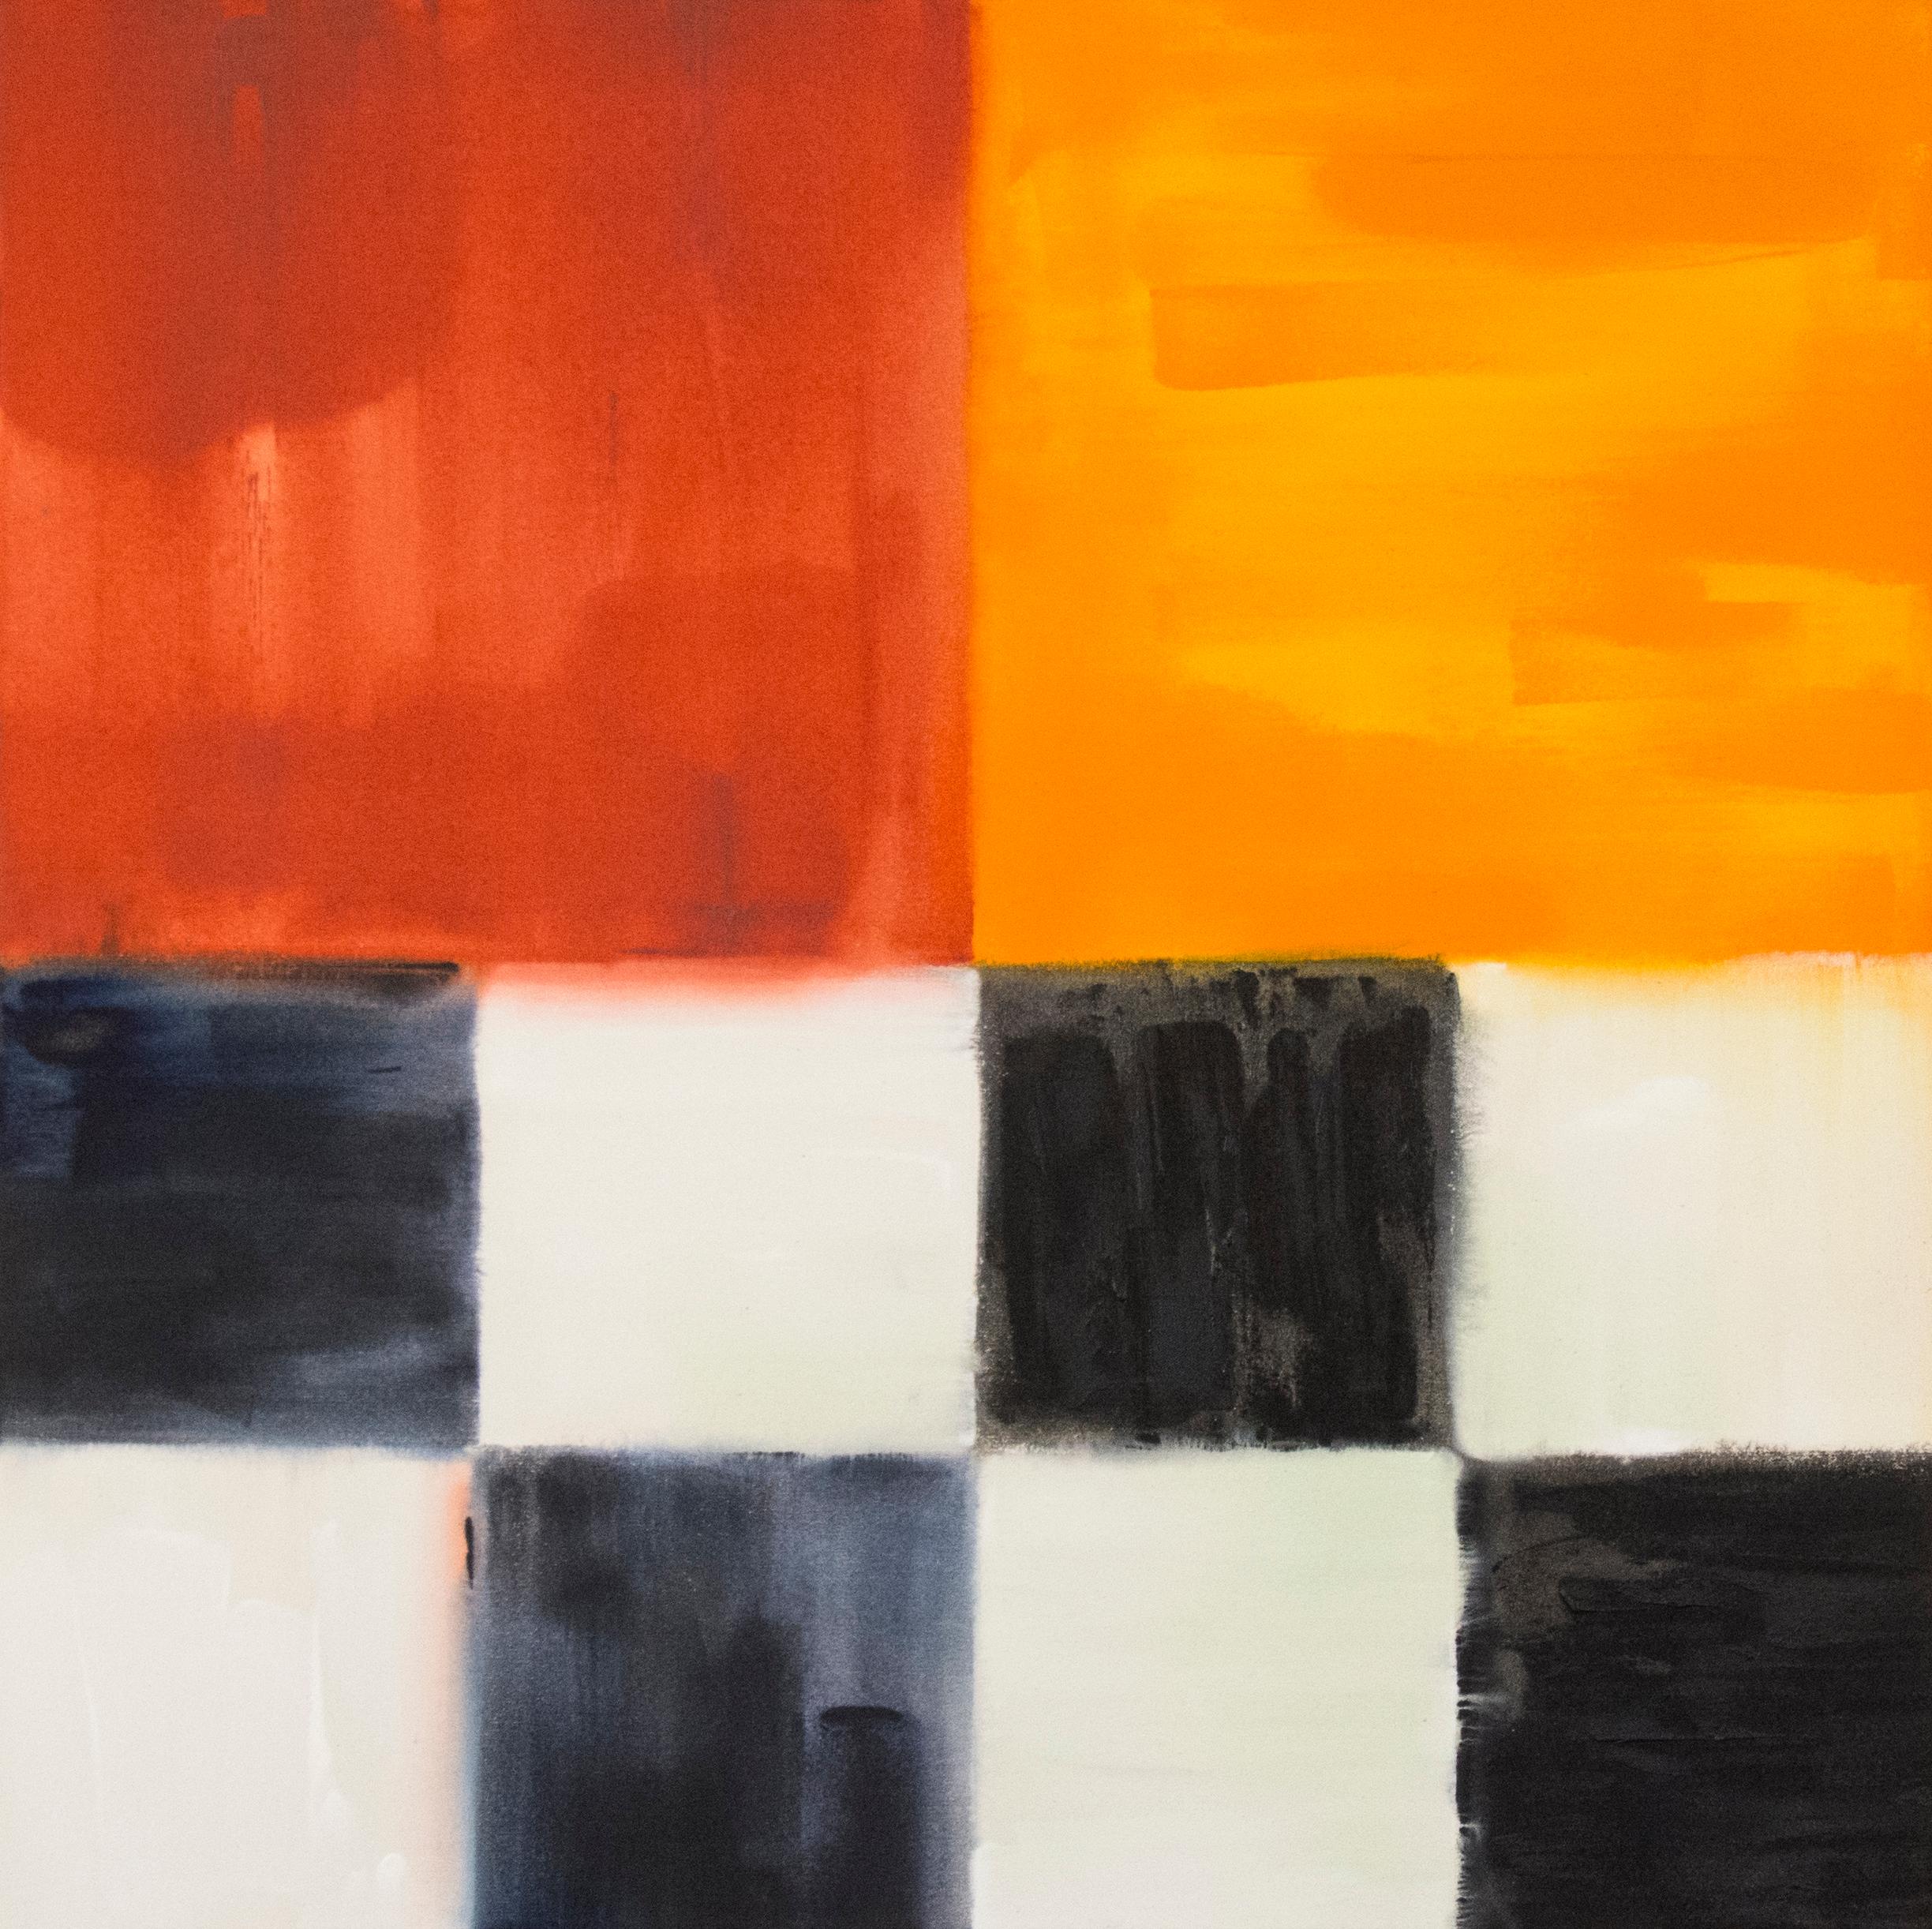 Act of Silence - grids of black, white, orange, red, abstract, acrylic on canvas - Painting by Milly Ristvedt